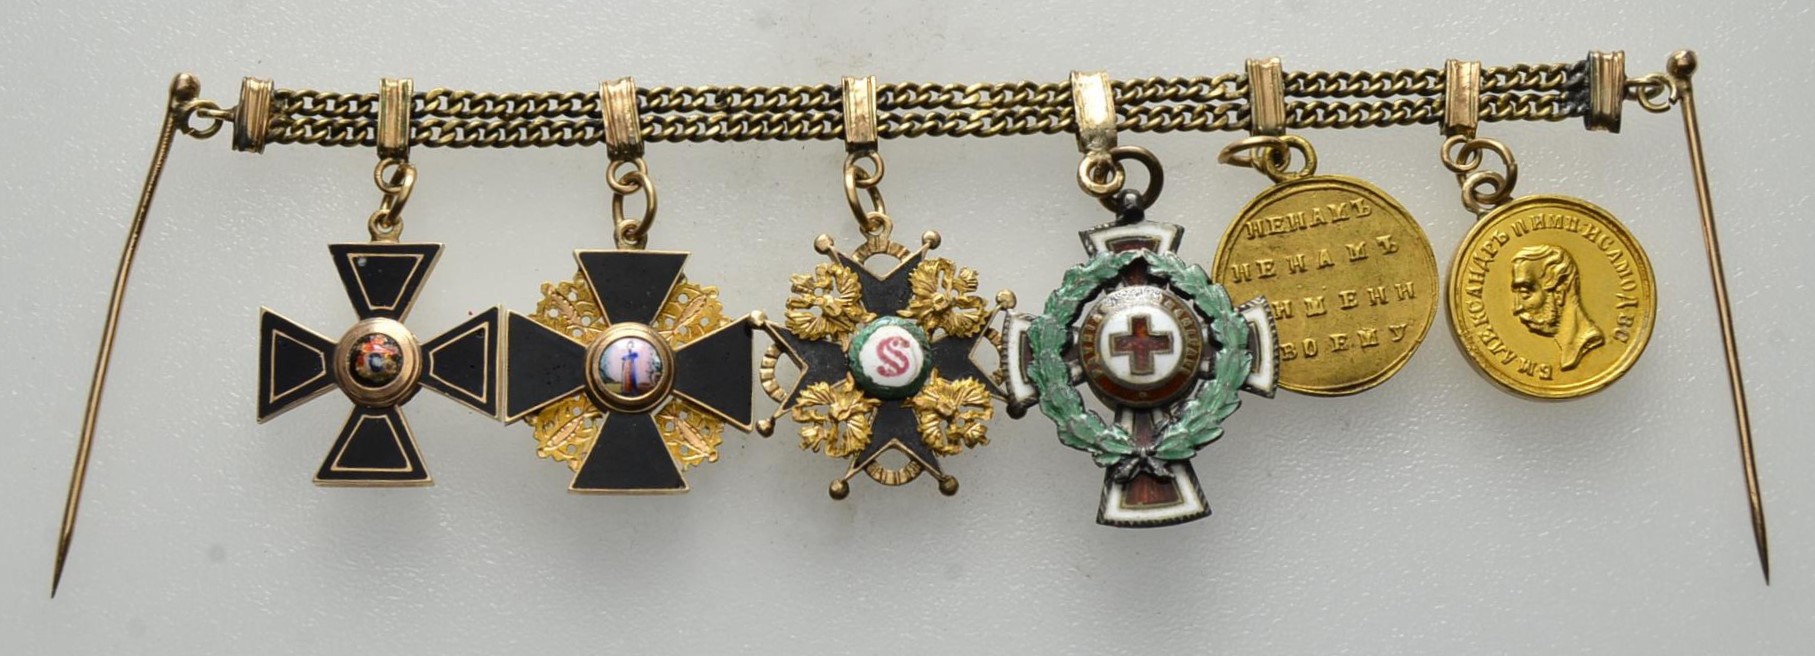 Miniature chain with six miniatures of awards.jpg